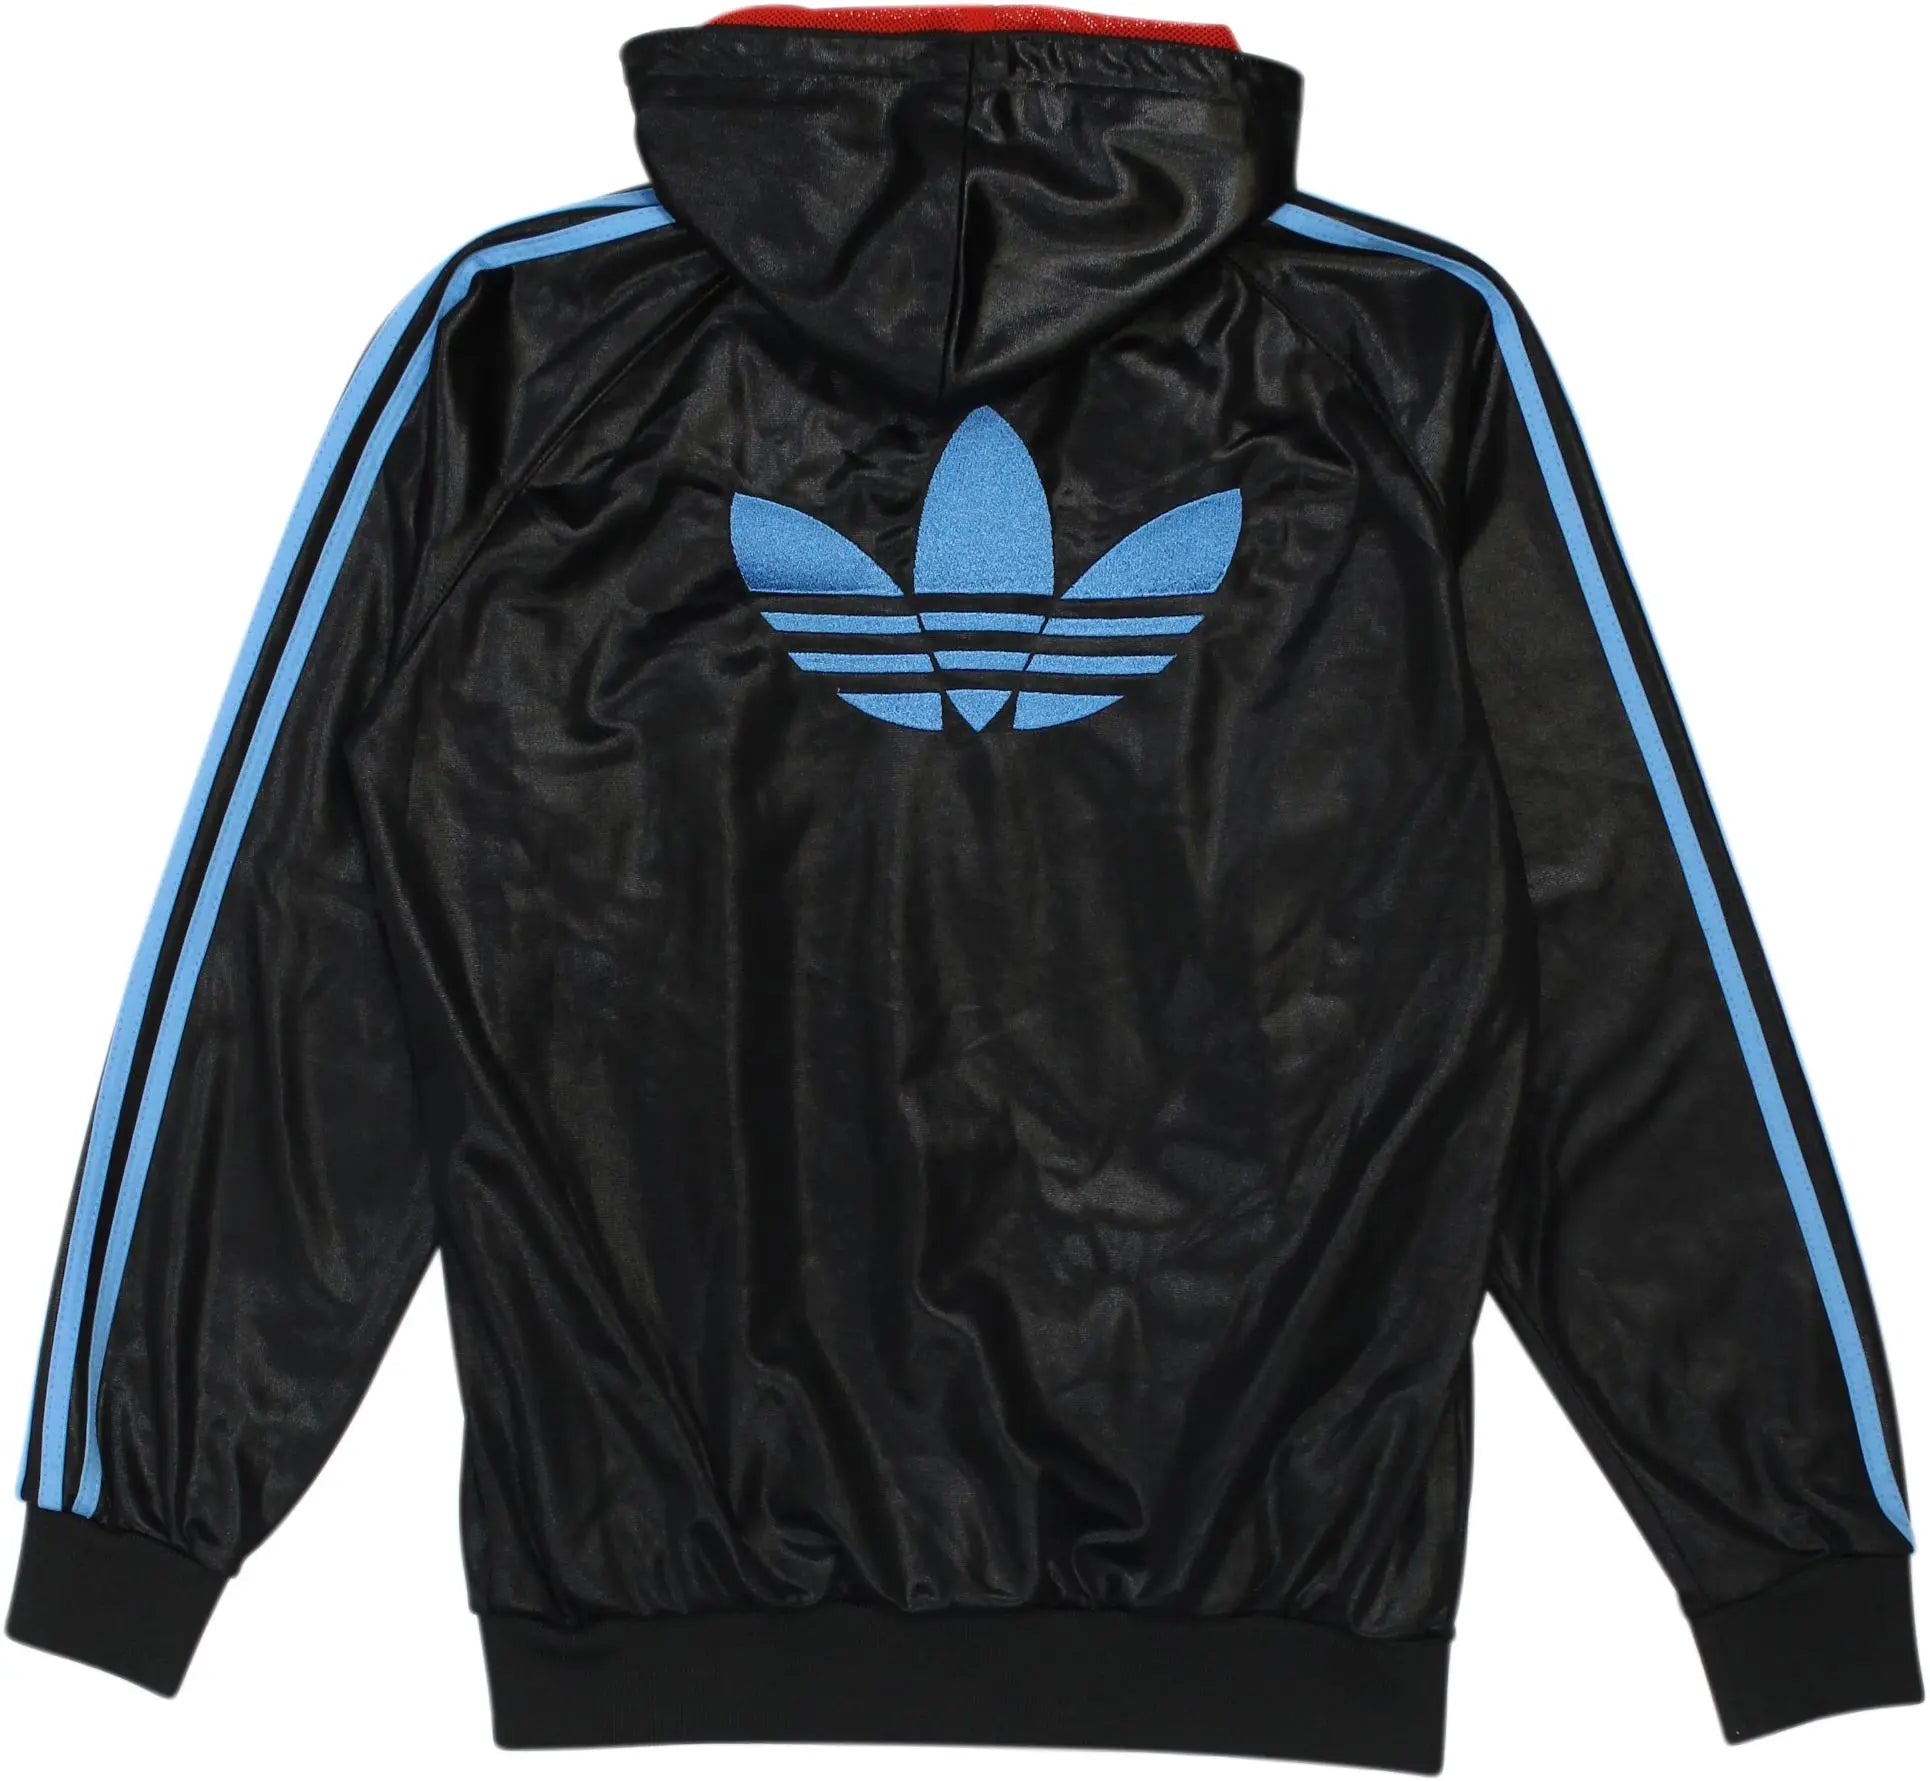 Adidas - BLUE8506- ThriftTale.com - Vintage and second handclothing